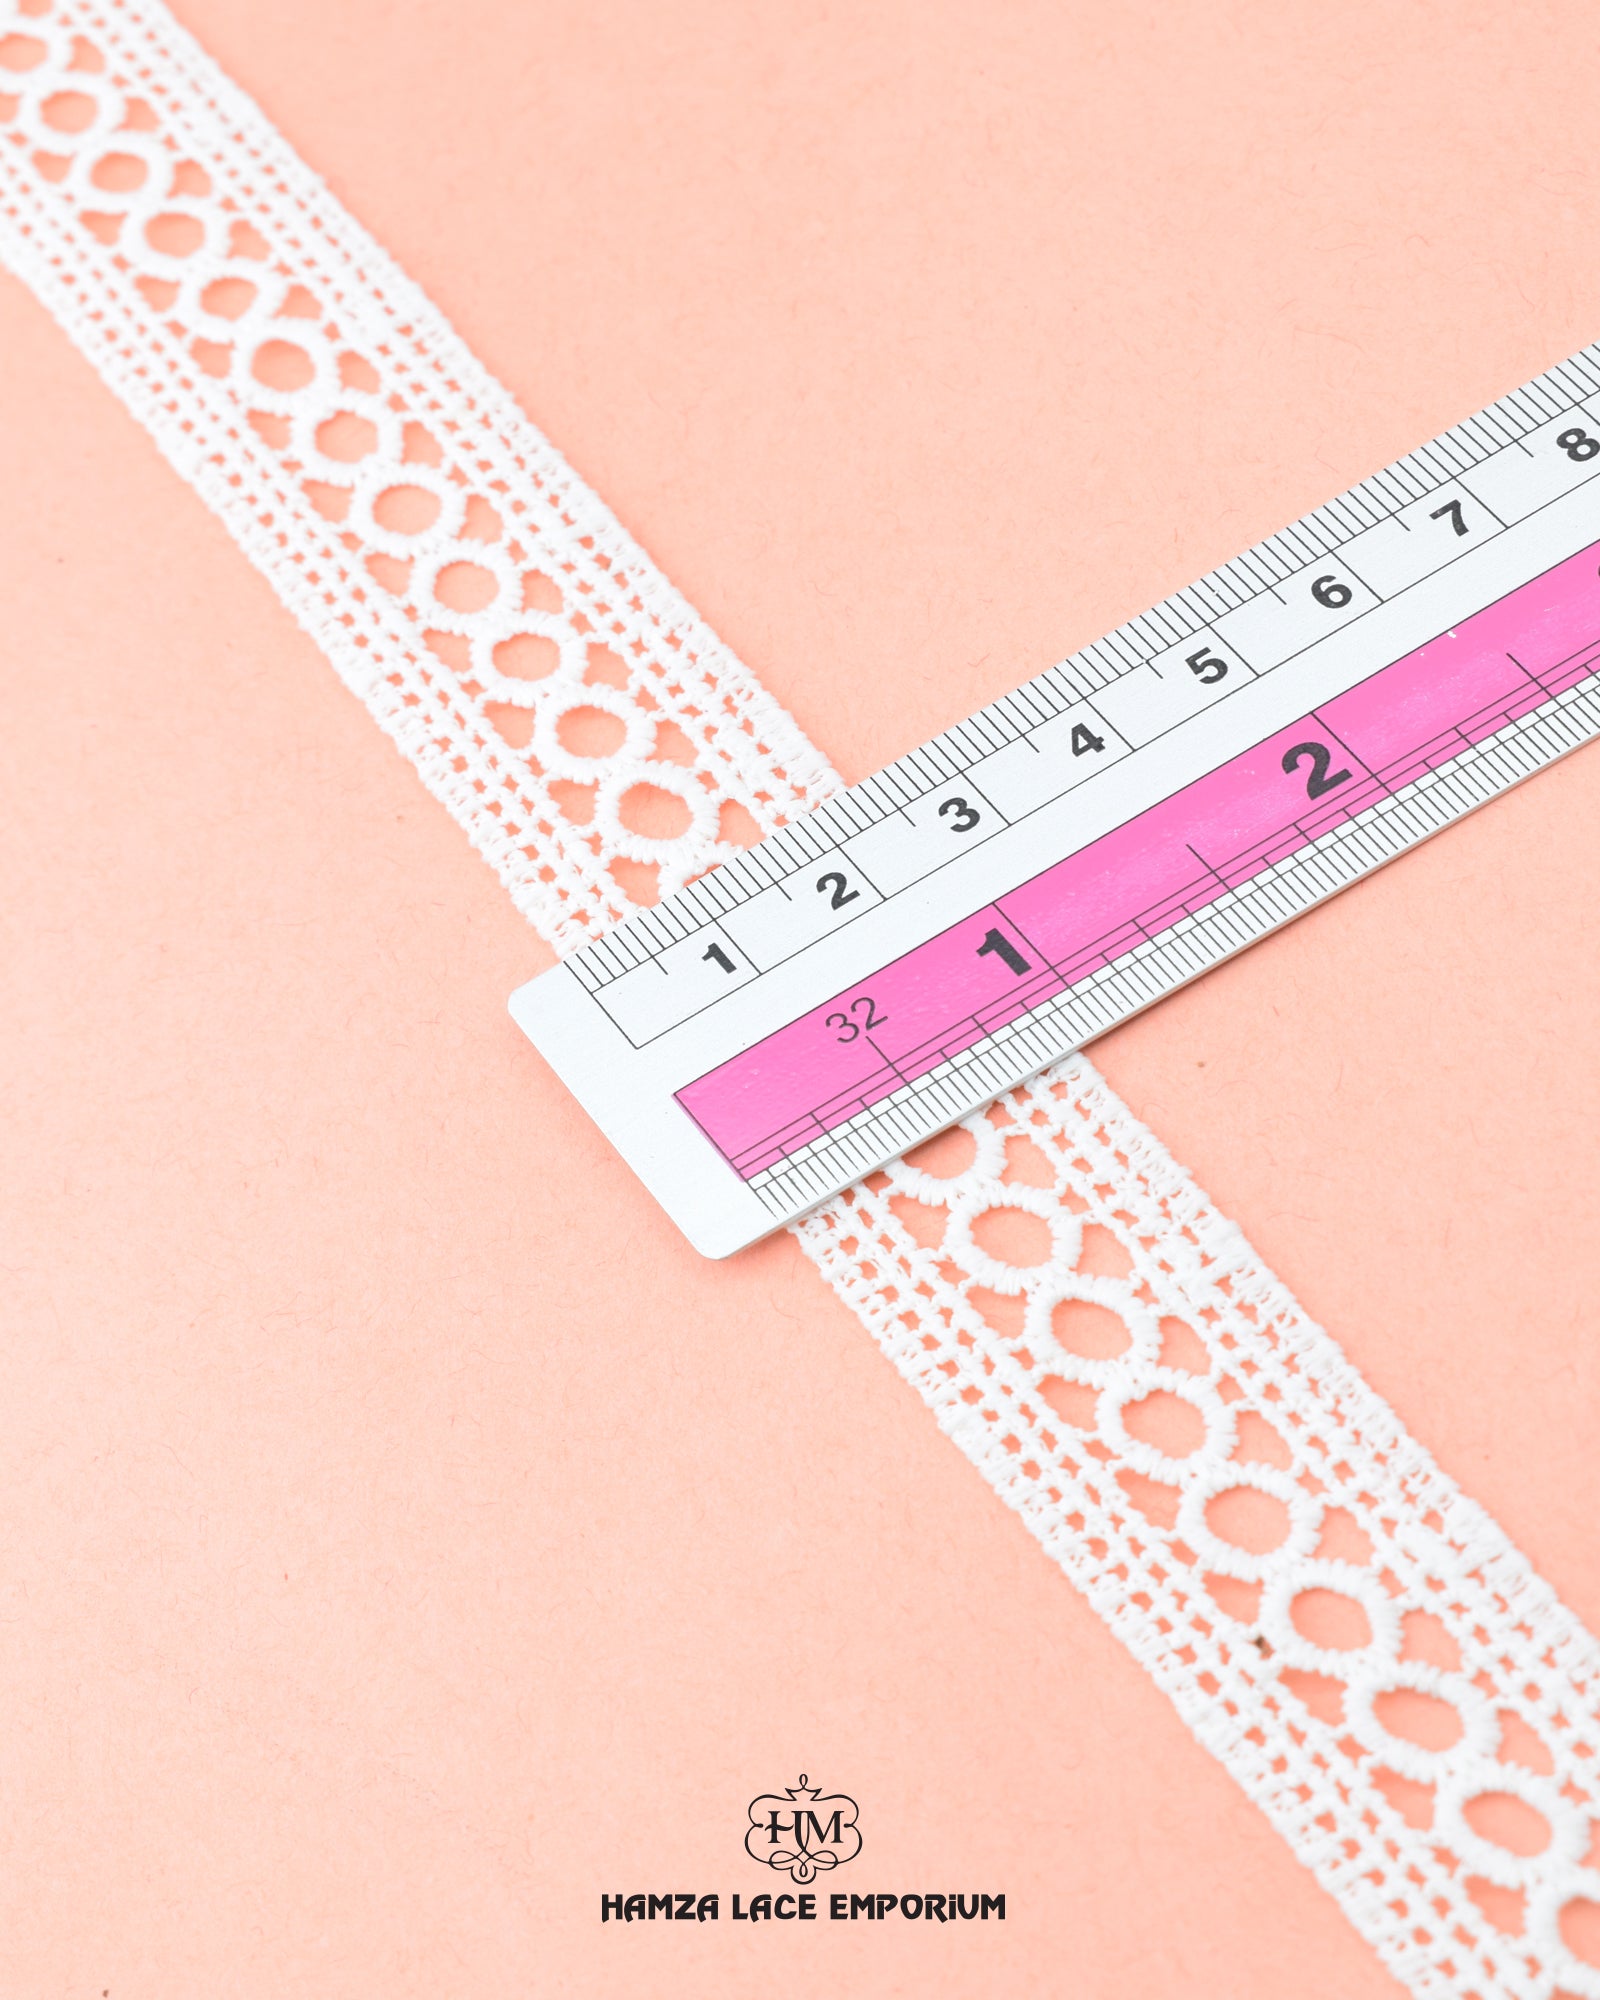 Size of the 'Center Ring Lace 23009' is given as '1' inch by placing a ruler on it